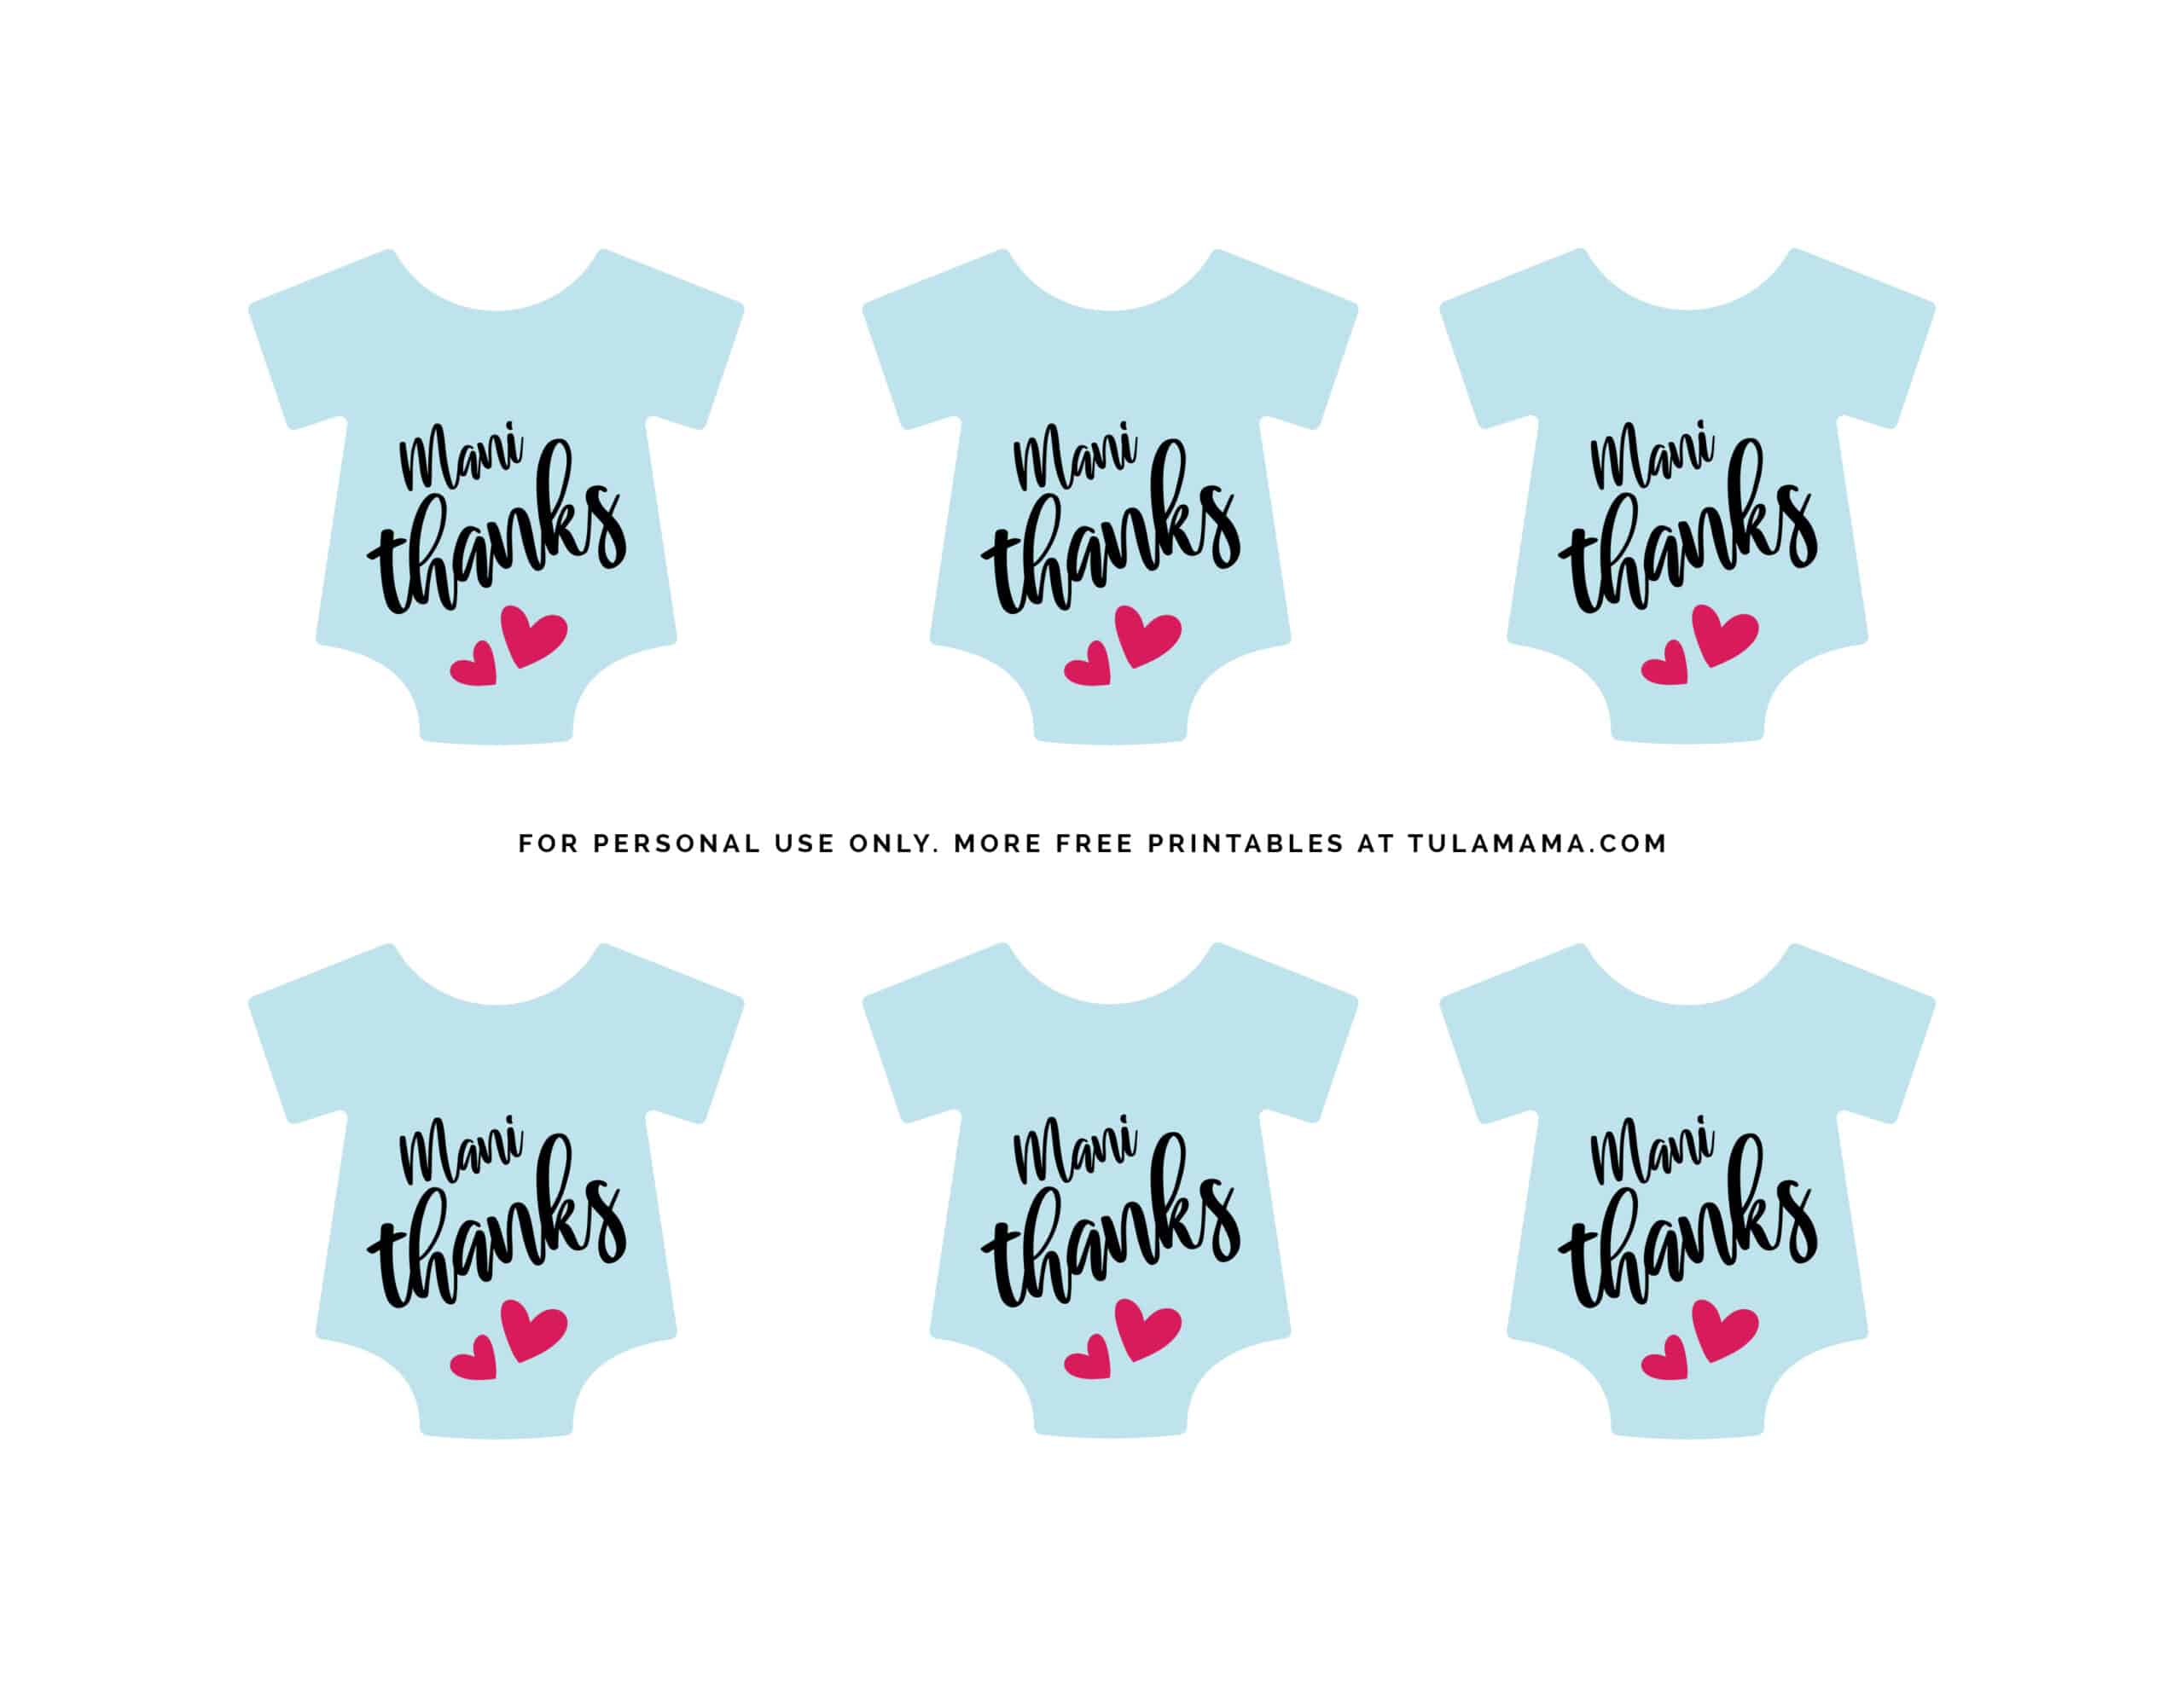 Please Sign The Onesie girl baby shower printable